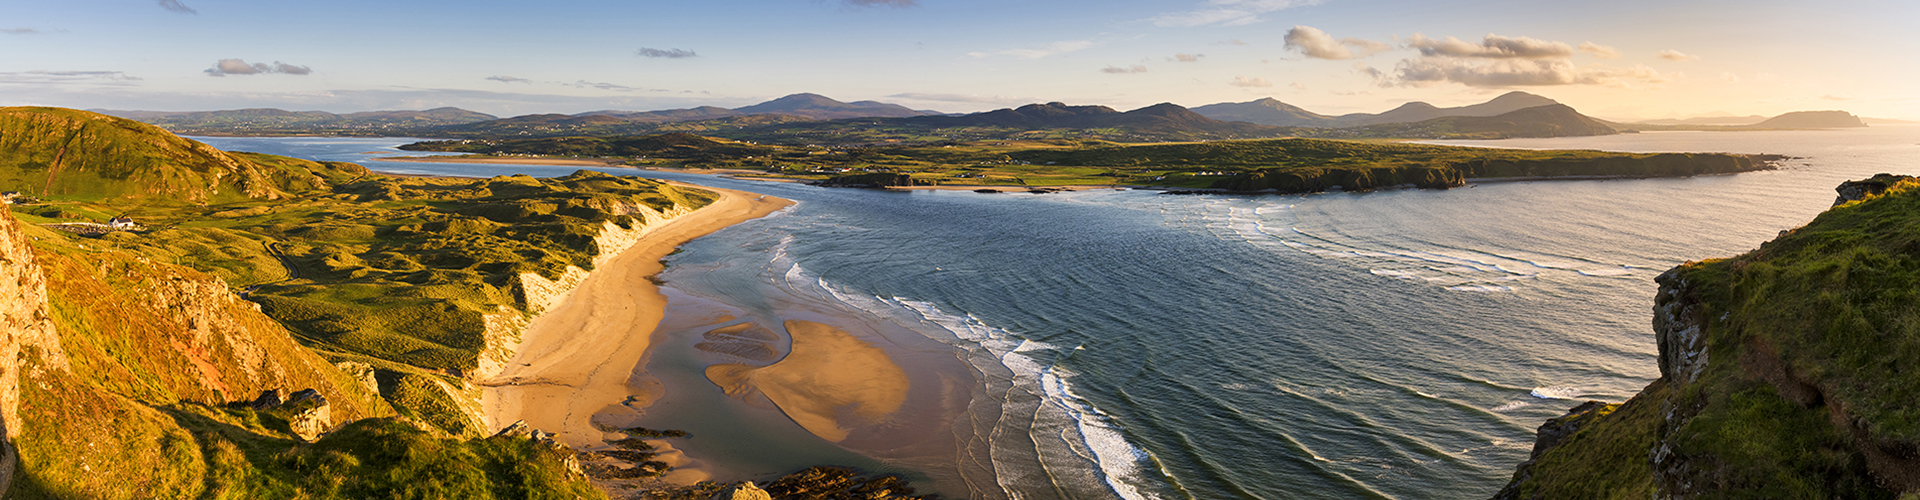 Mac Tours Ireland Home Page Five Finger Strand, Donegal